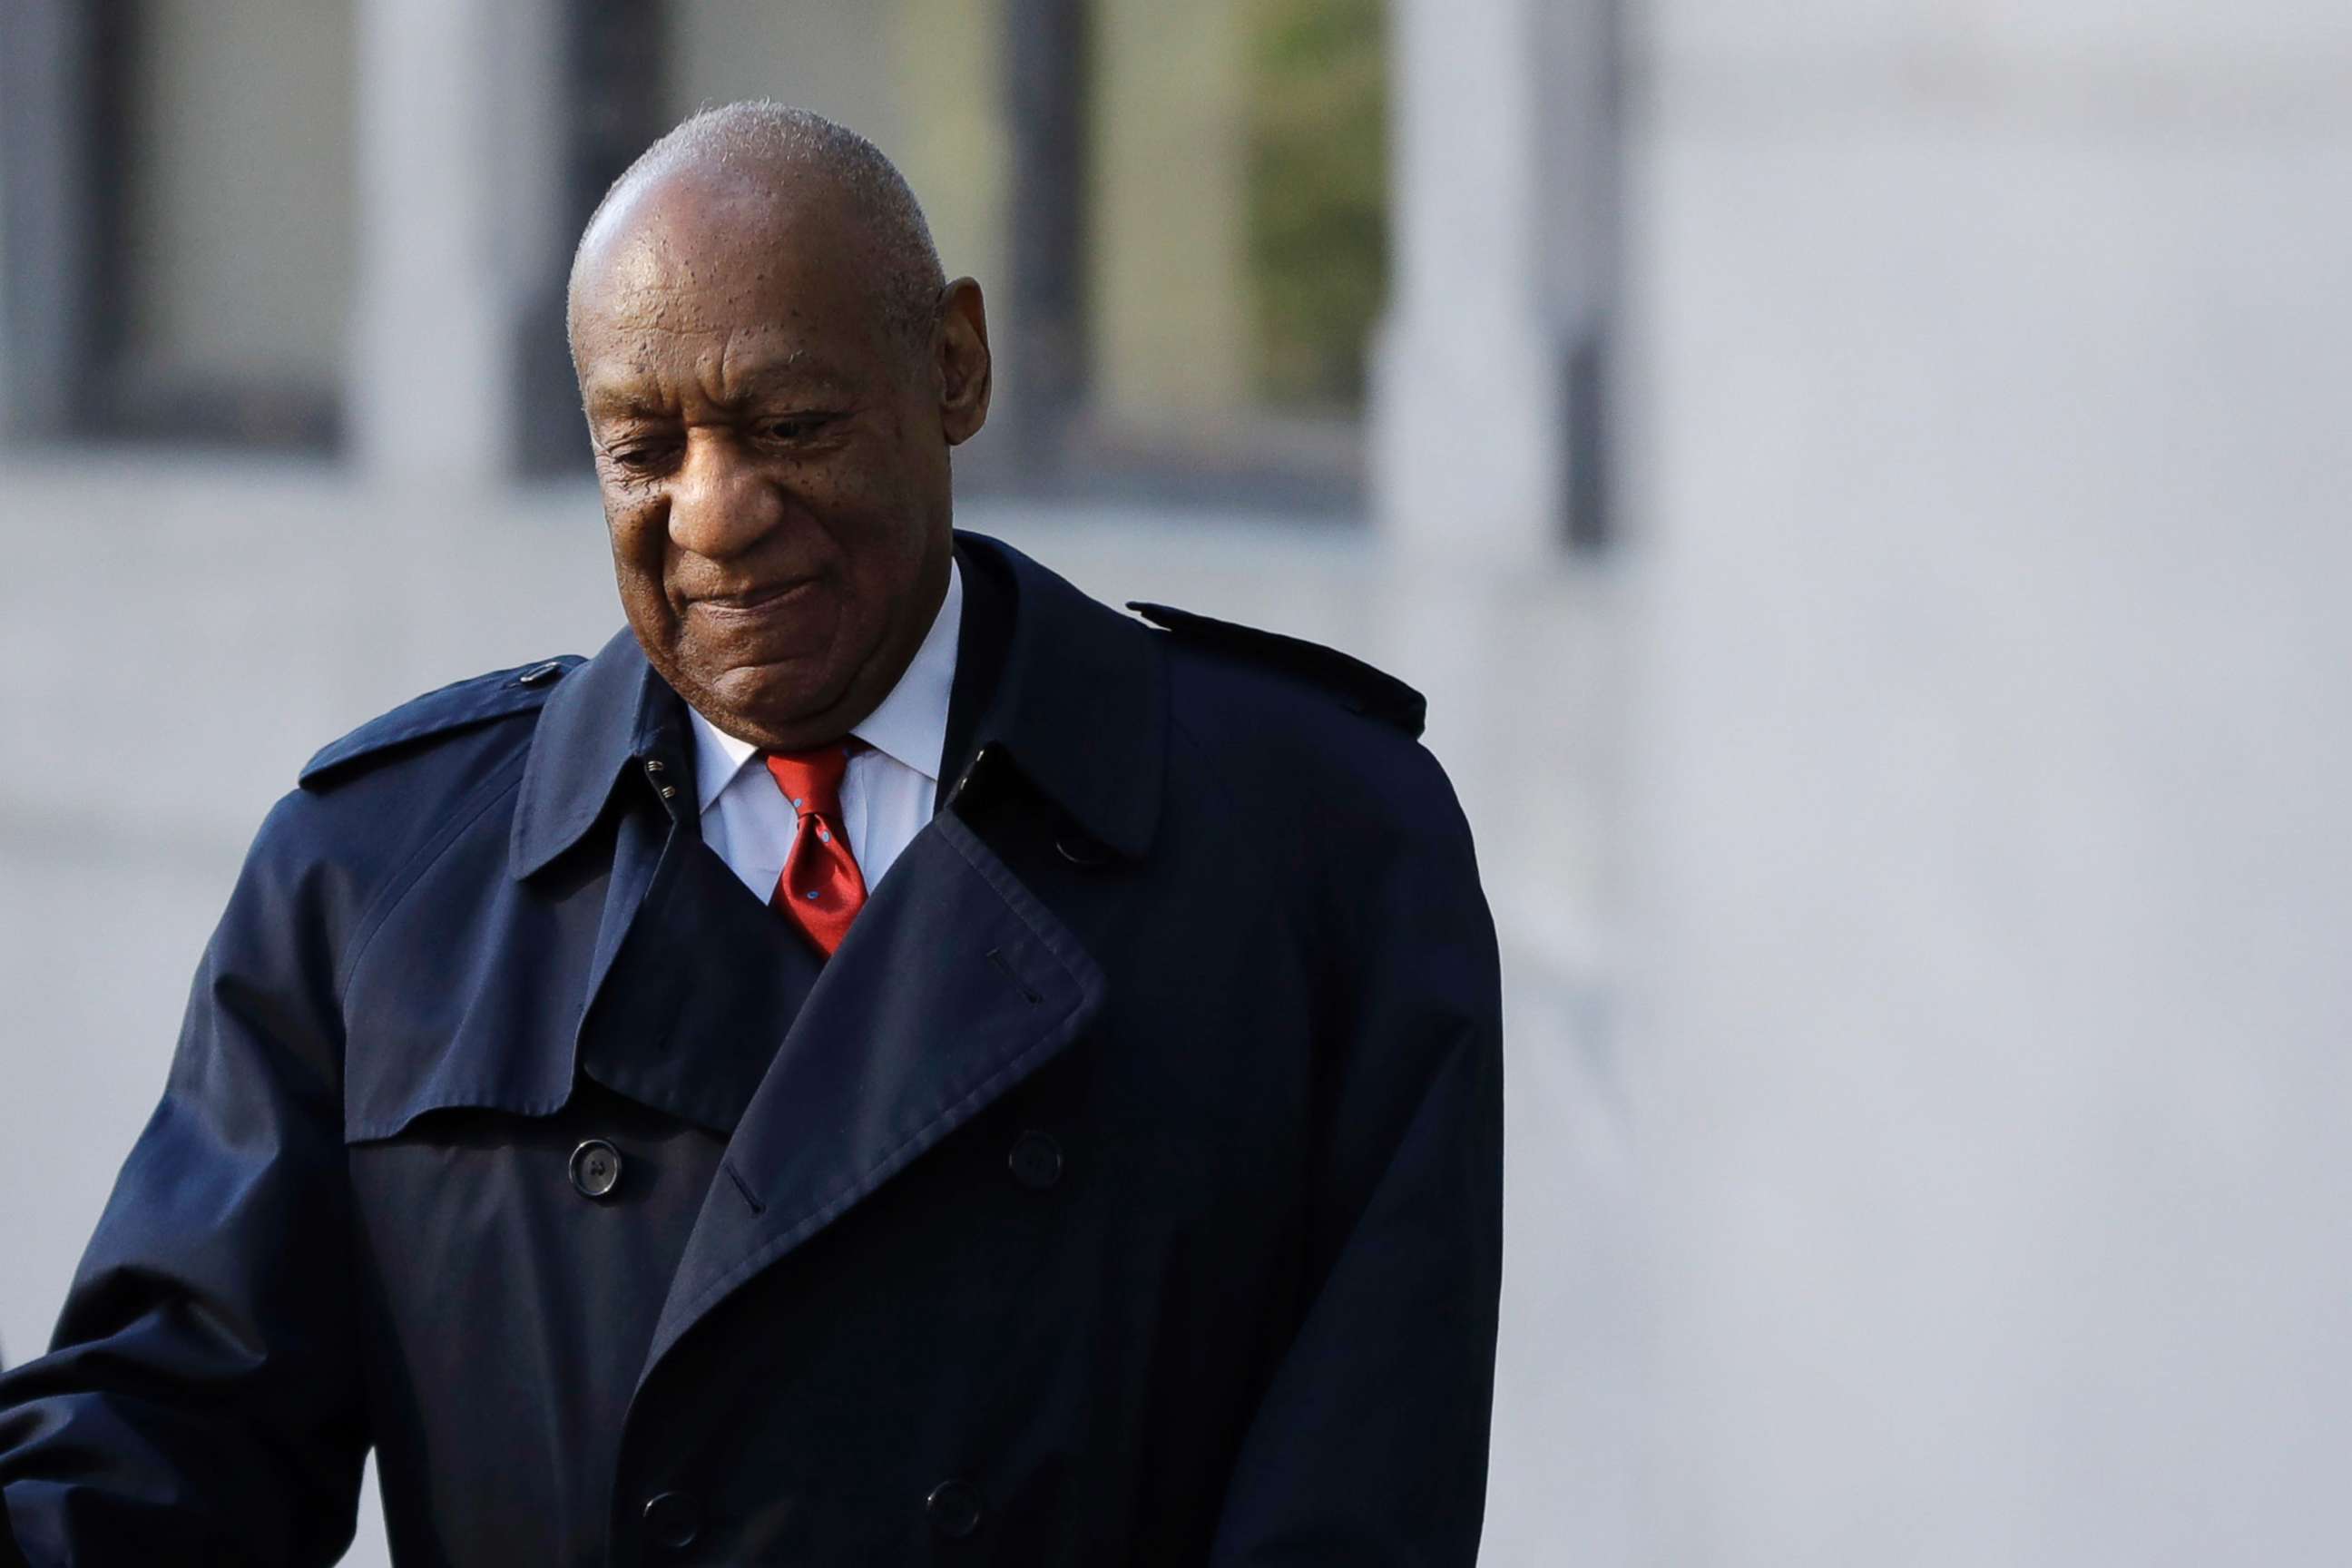 PHOTO: Bill Cosby arrives for his sexual assault trial, Thursday, April 26, 2018, at the Montgomery County Courthouse in Norristown, Pa.